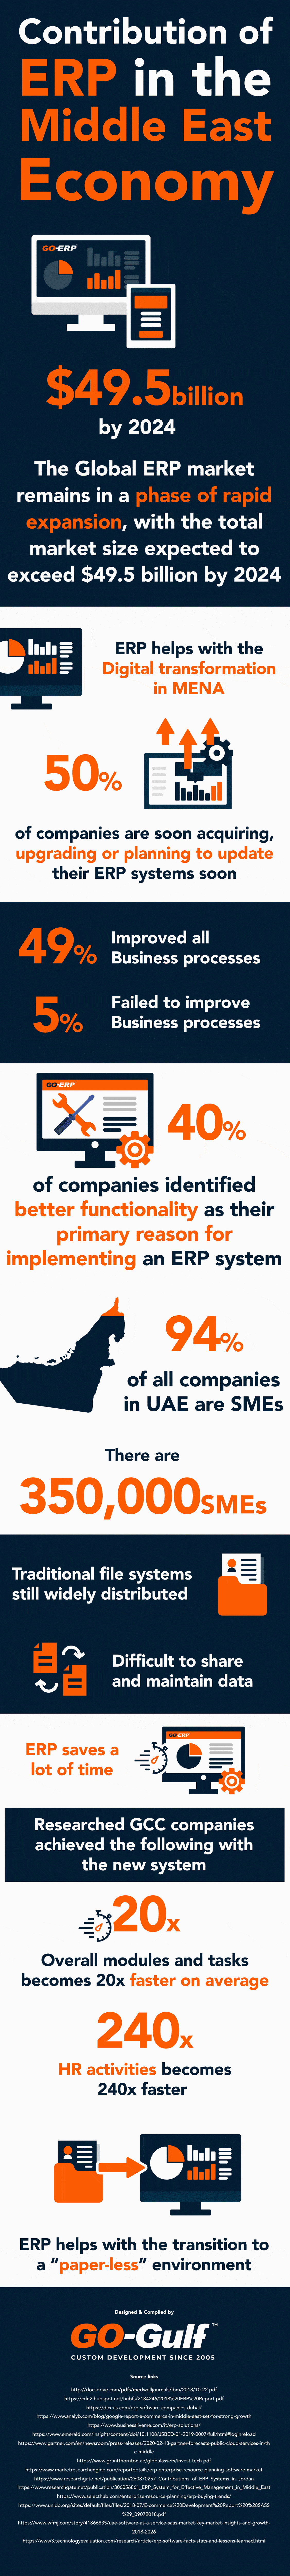 Contribution Of ERP In Middle East Economy 